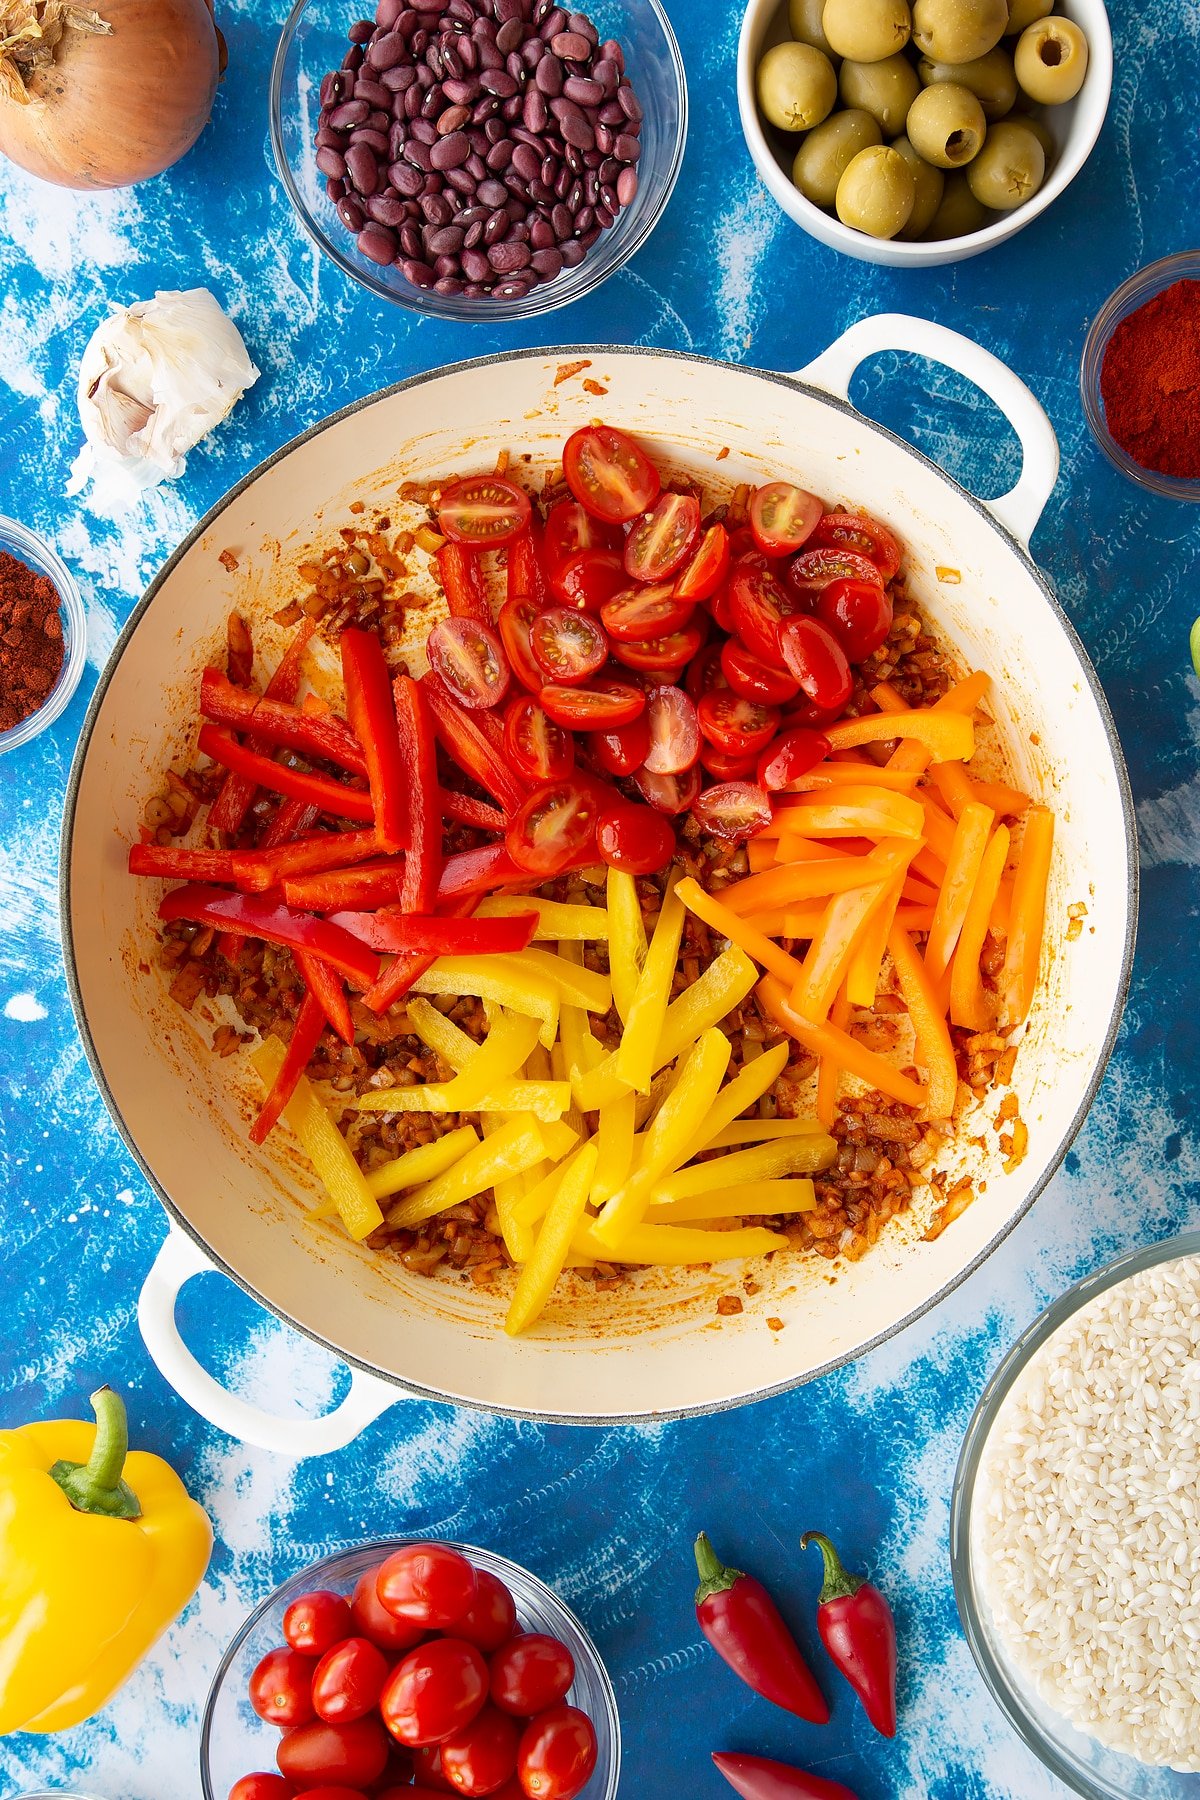 Sweated onions, garlic, cayenne, paprika and oregano in a pan with tomatoes and mixed sliced peppers. Ingredients to make easy Spanish rice and beans surround the pan.